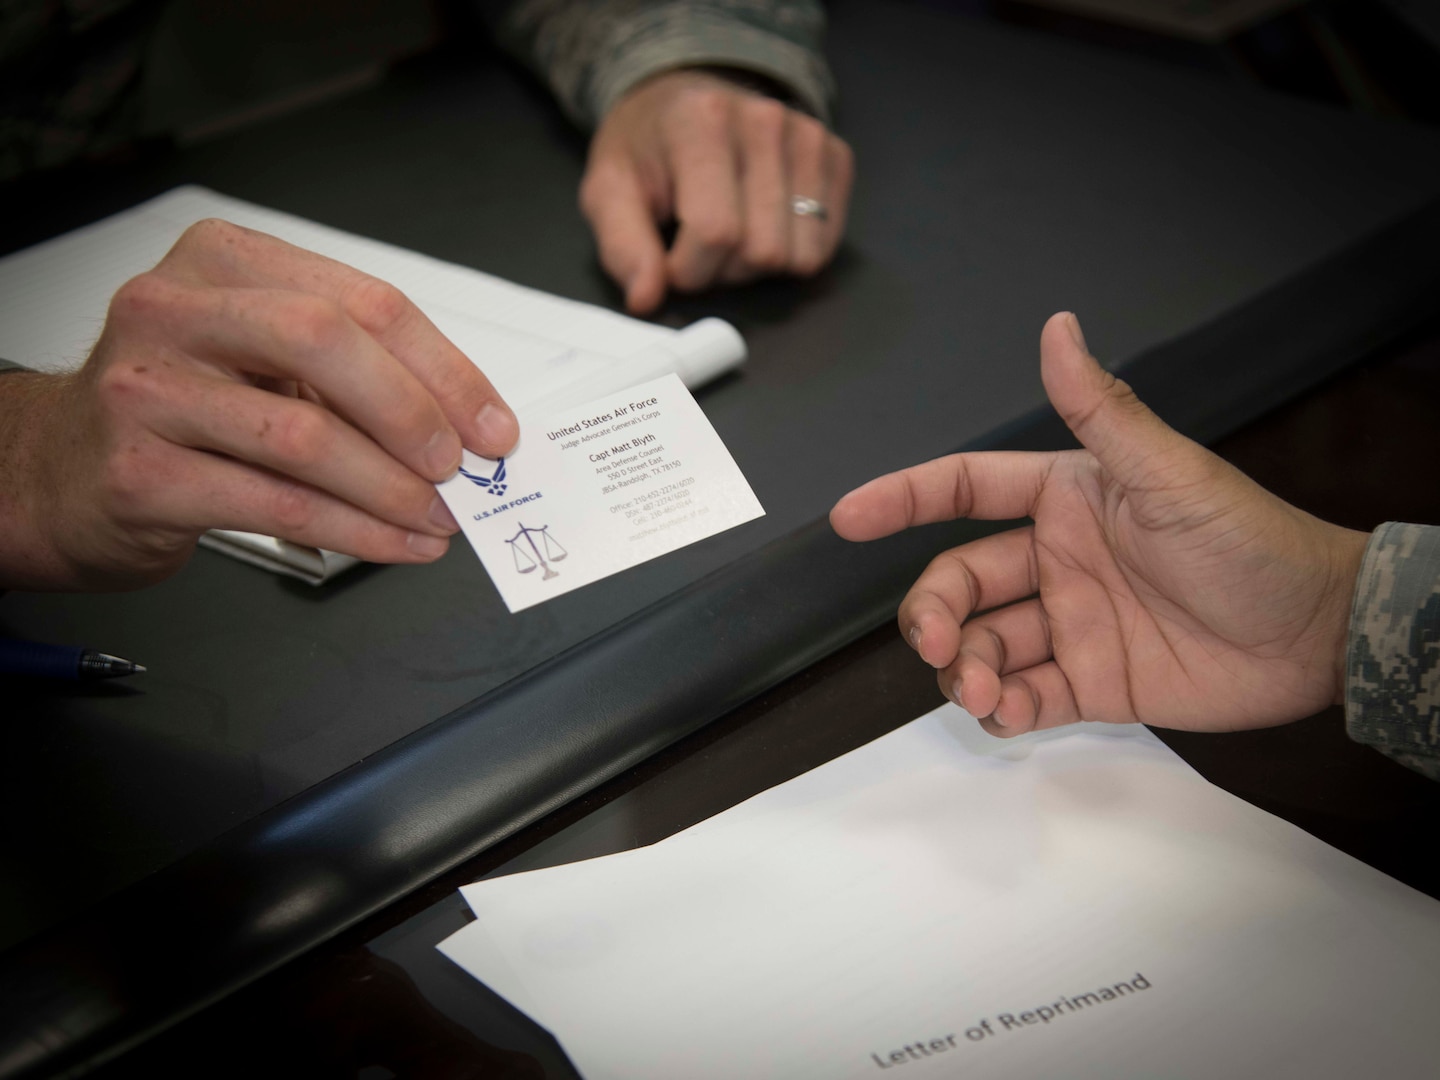 Capt. Matthew Blyth, a Defense Attorney with the Air Force Legal Operations Agency/Area Defense Council hands a troubled Airman his official business card July 10, 2019 at the Joint Base San Antonio-Randolph ADC. The ADC is a full-spectrum resource, implemented in 1974, to help Airmen through the lowest level paperwork, such as a letter of counseling or a letter of reprimand, up to the most serious court martial cases. (U.S. Air Force photo by: Airman 1st Class Shelby Pruitt)